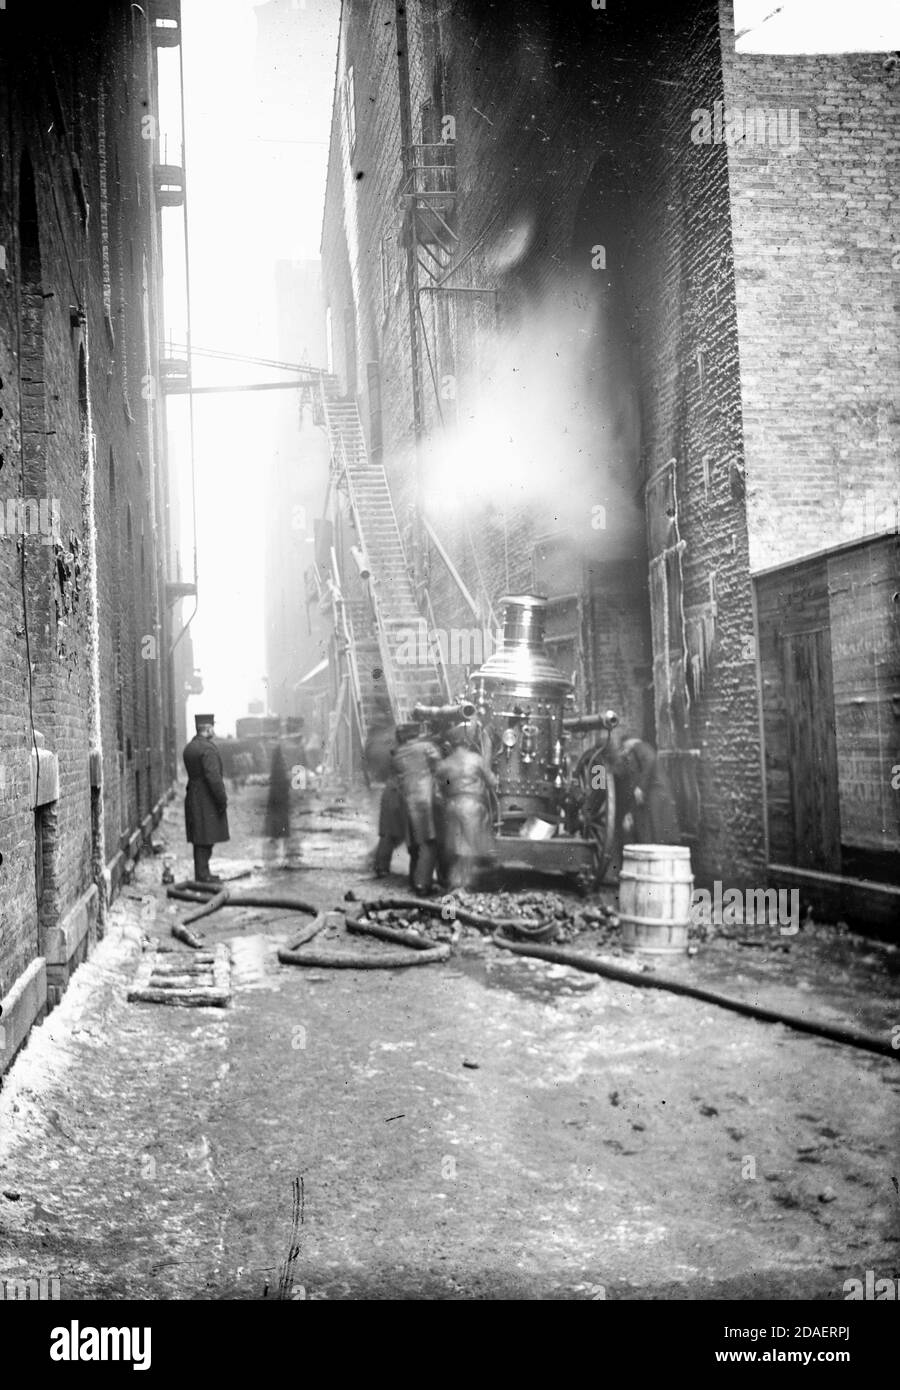 View of a fire engine and male firefighters in an alley during the Iroquois Theater fire, December 30, 1903, Chicago, Illinois. Stock Photo